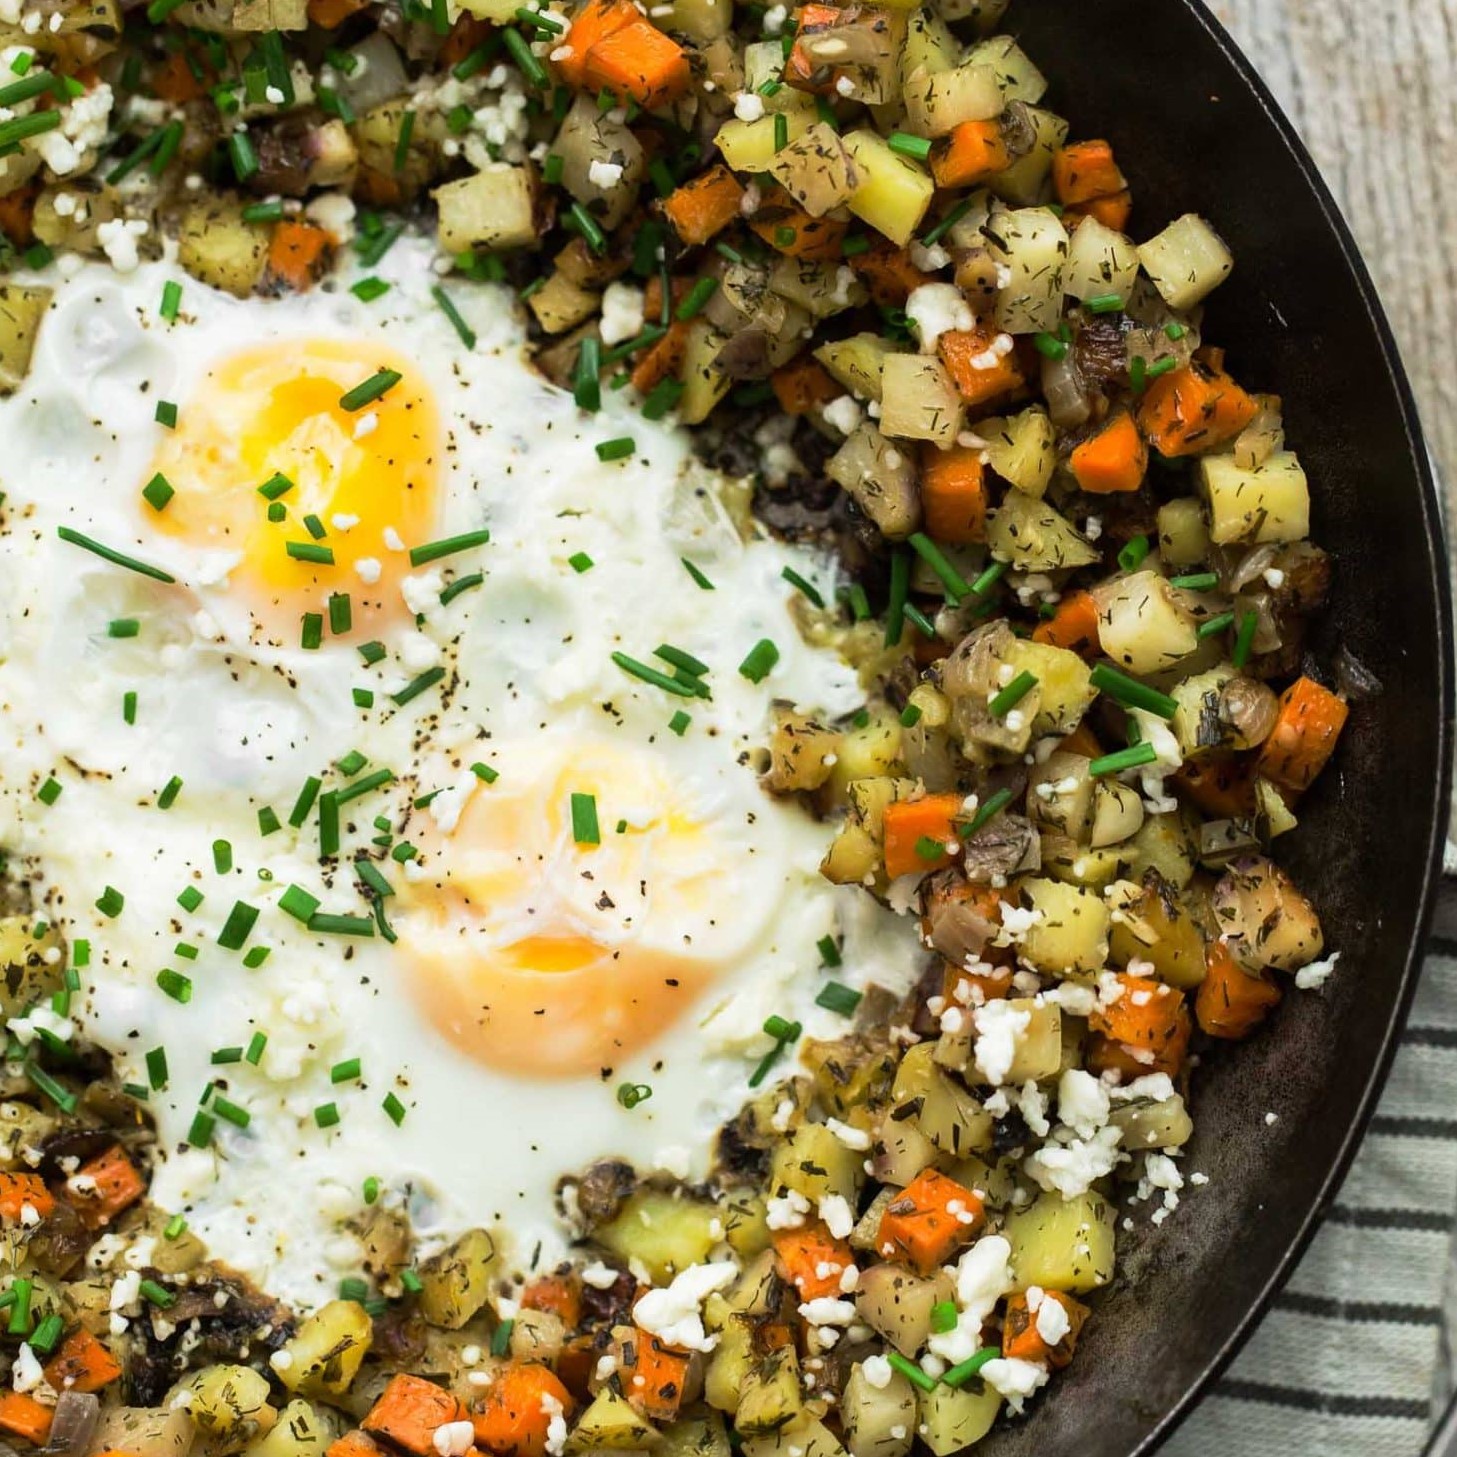 close-up of skillet with finely diced root veggies, green herbs and friend egg in the middle